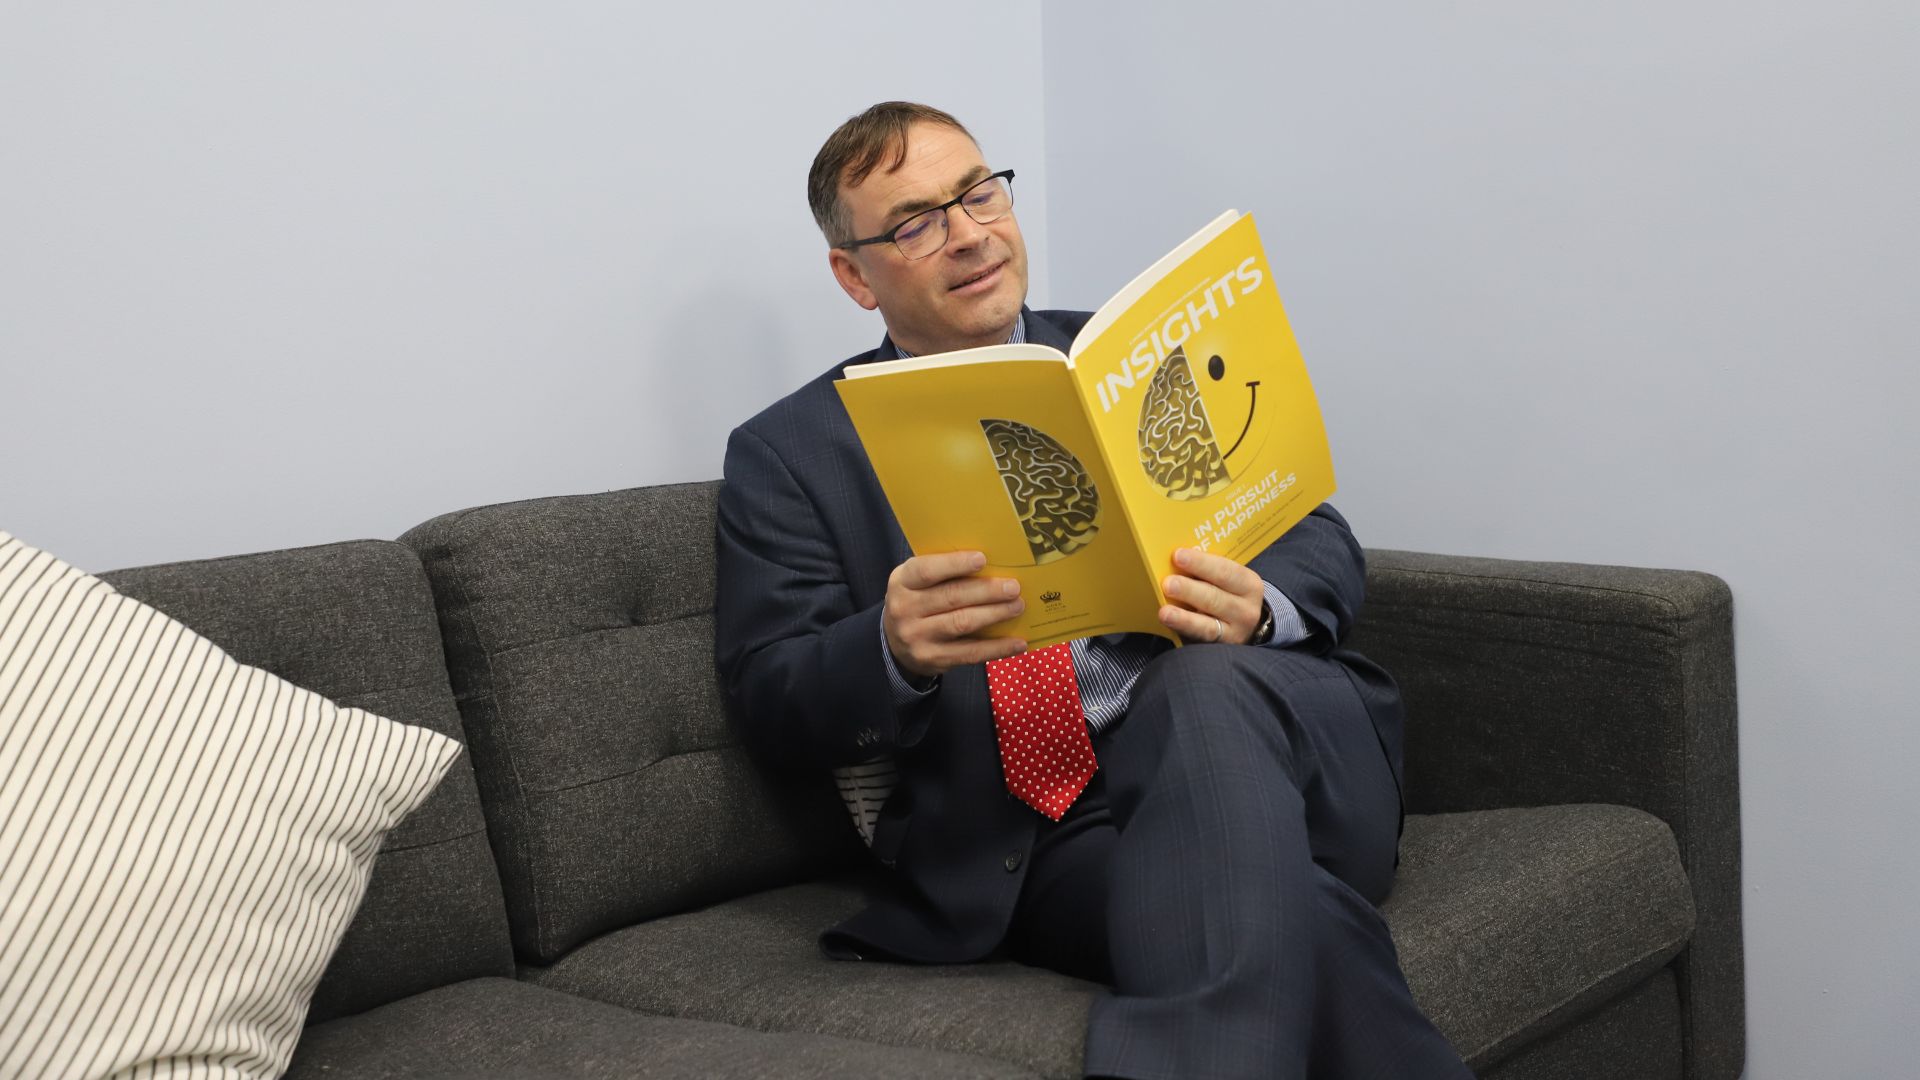 Our Head of Secondary Chris Lowe gives his insight into Knowledge is Power - Our Head of Secondary Chris Lowe gives his insight into Knowledge is Power